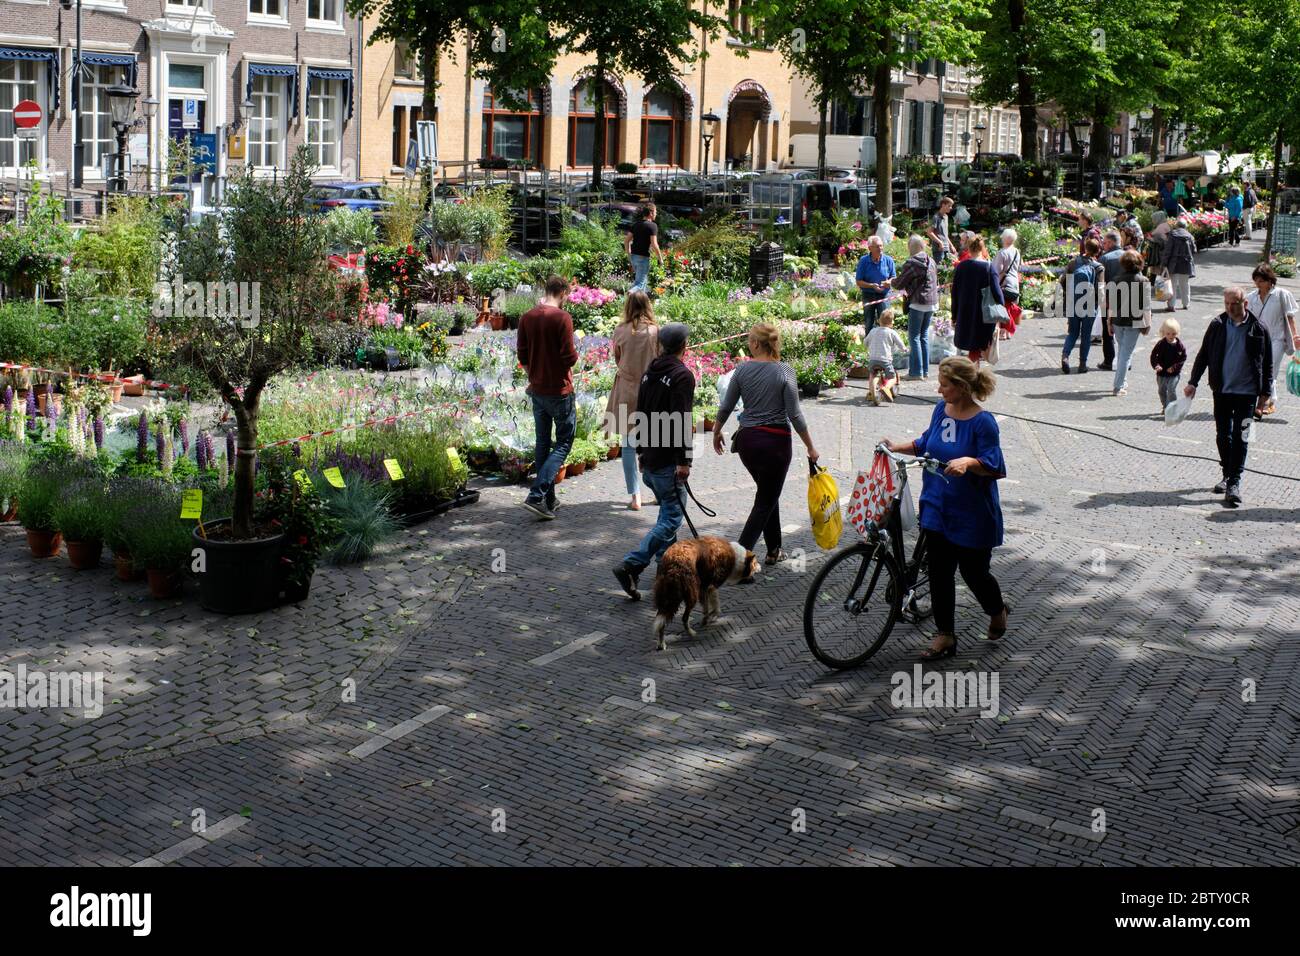 The reopened colorful flower market in the city of Utrecht, Netherlands, in the end of May 2020 as corona measures have eased. Stock Photo